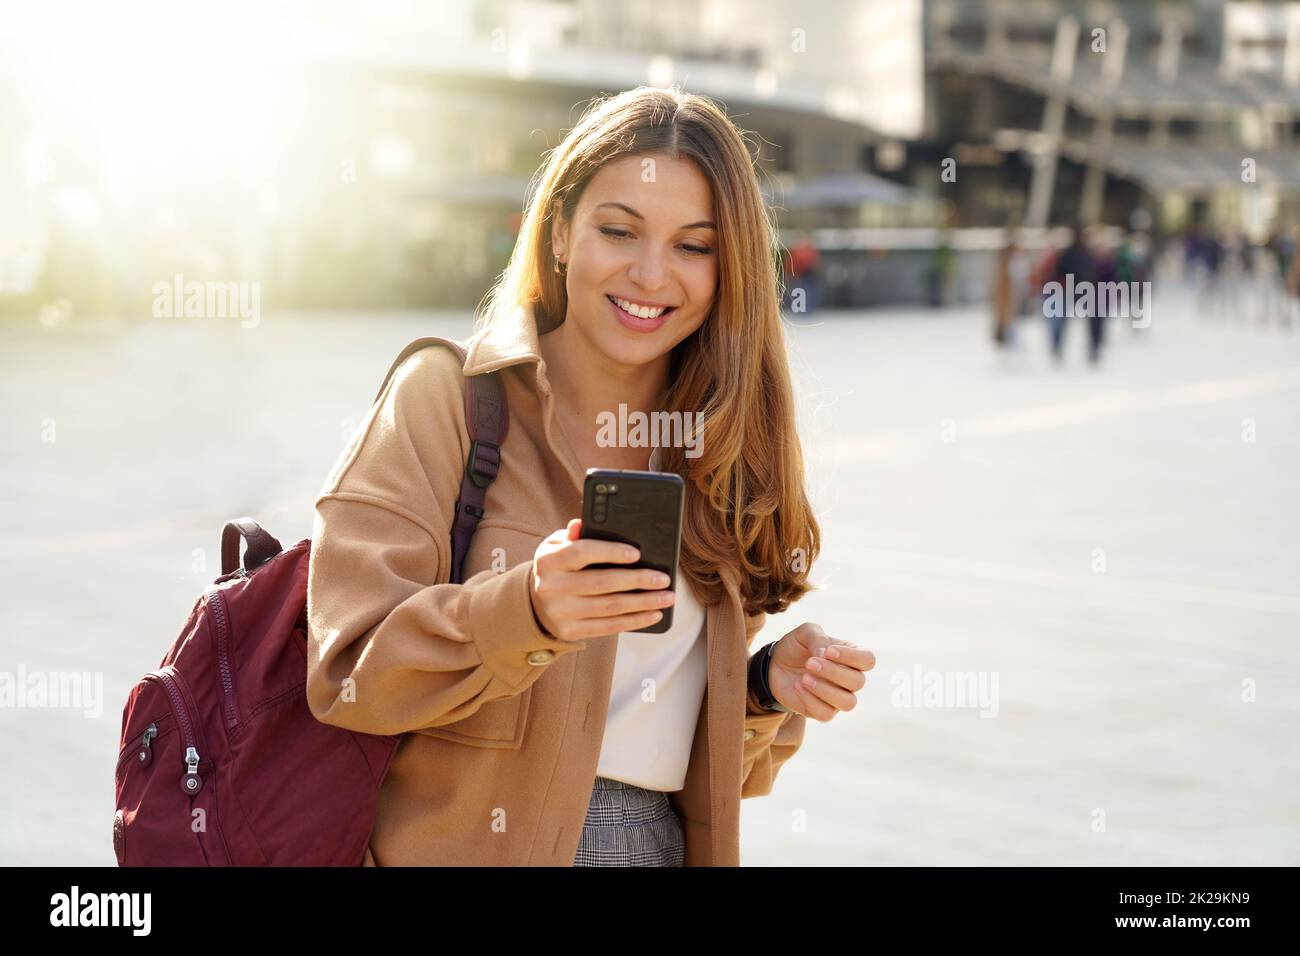 Beautiful smiling student girl using cellphone walking in city street Stock Photo